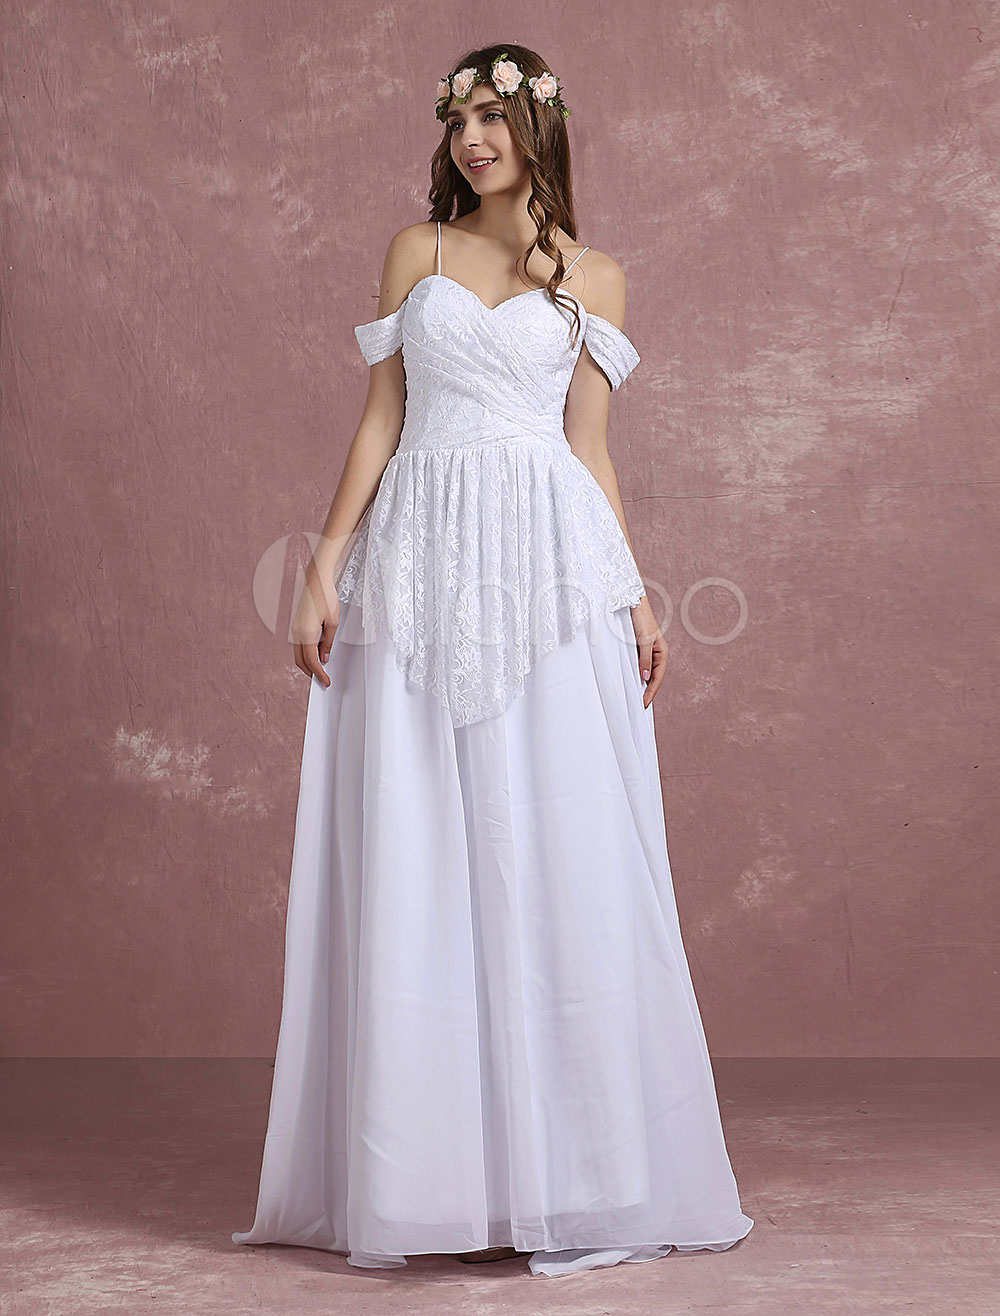 Summer Wedding Dresses 2020 Boho White Lace Chiffon Bridal Gown Off The ...